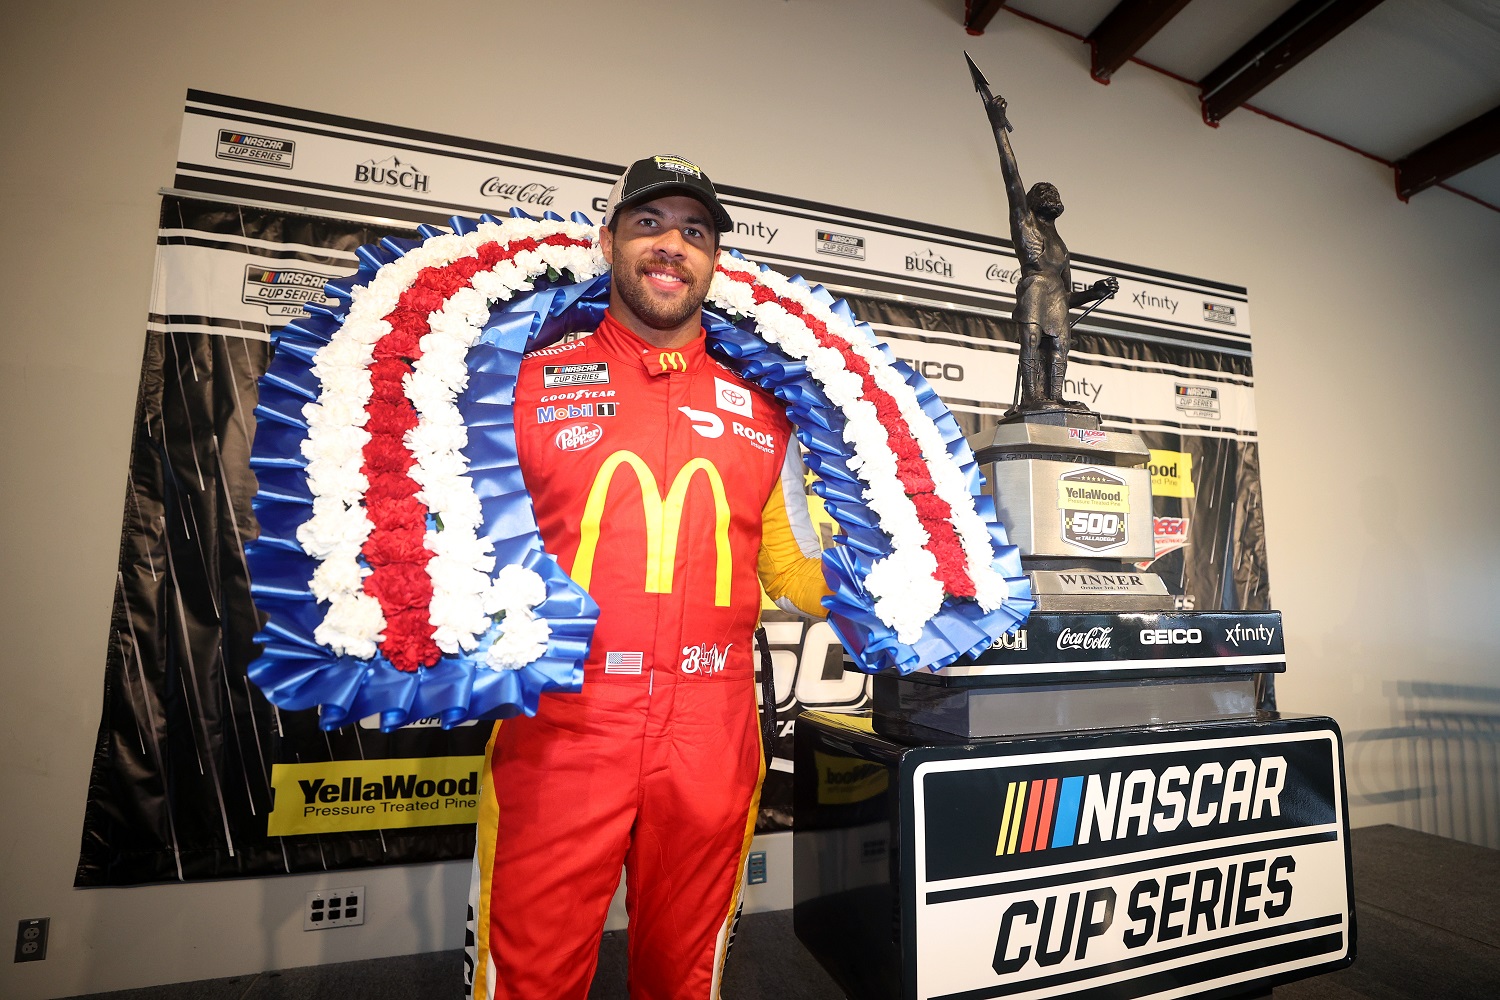 Bubba Wallace, driver of the No. 23 Toyota, celebrates in victory lane after winning the rain-shortened NASCAR Cup Series YellaWood 500 at Talladega Superspeedway on Oct. 4, 2021.